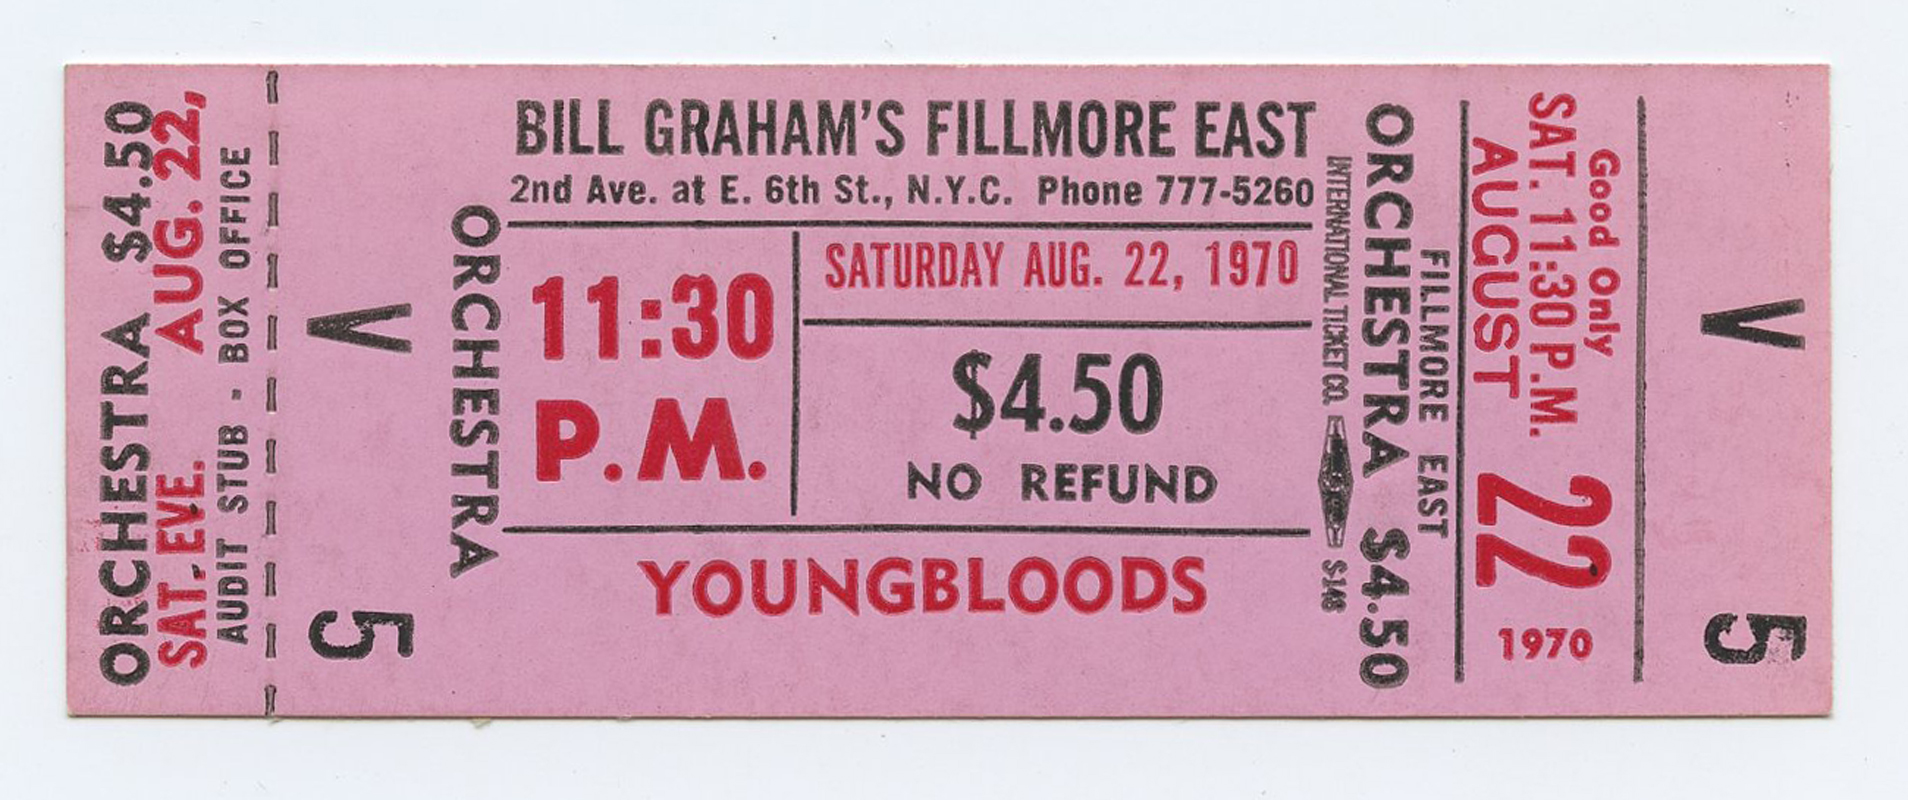 Bill Graham Fillmore East Vintage Ticket 1970 Aug 22 The Youngbloods ...